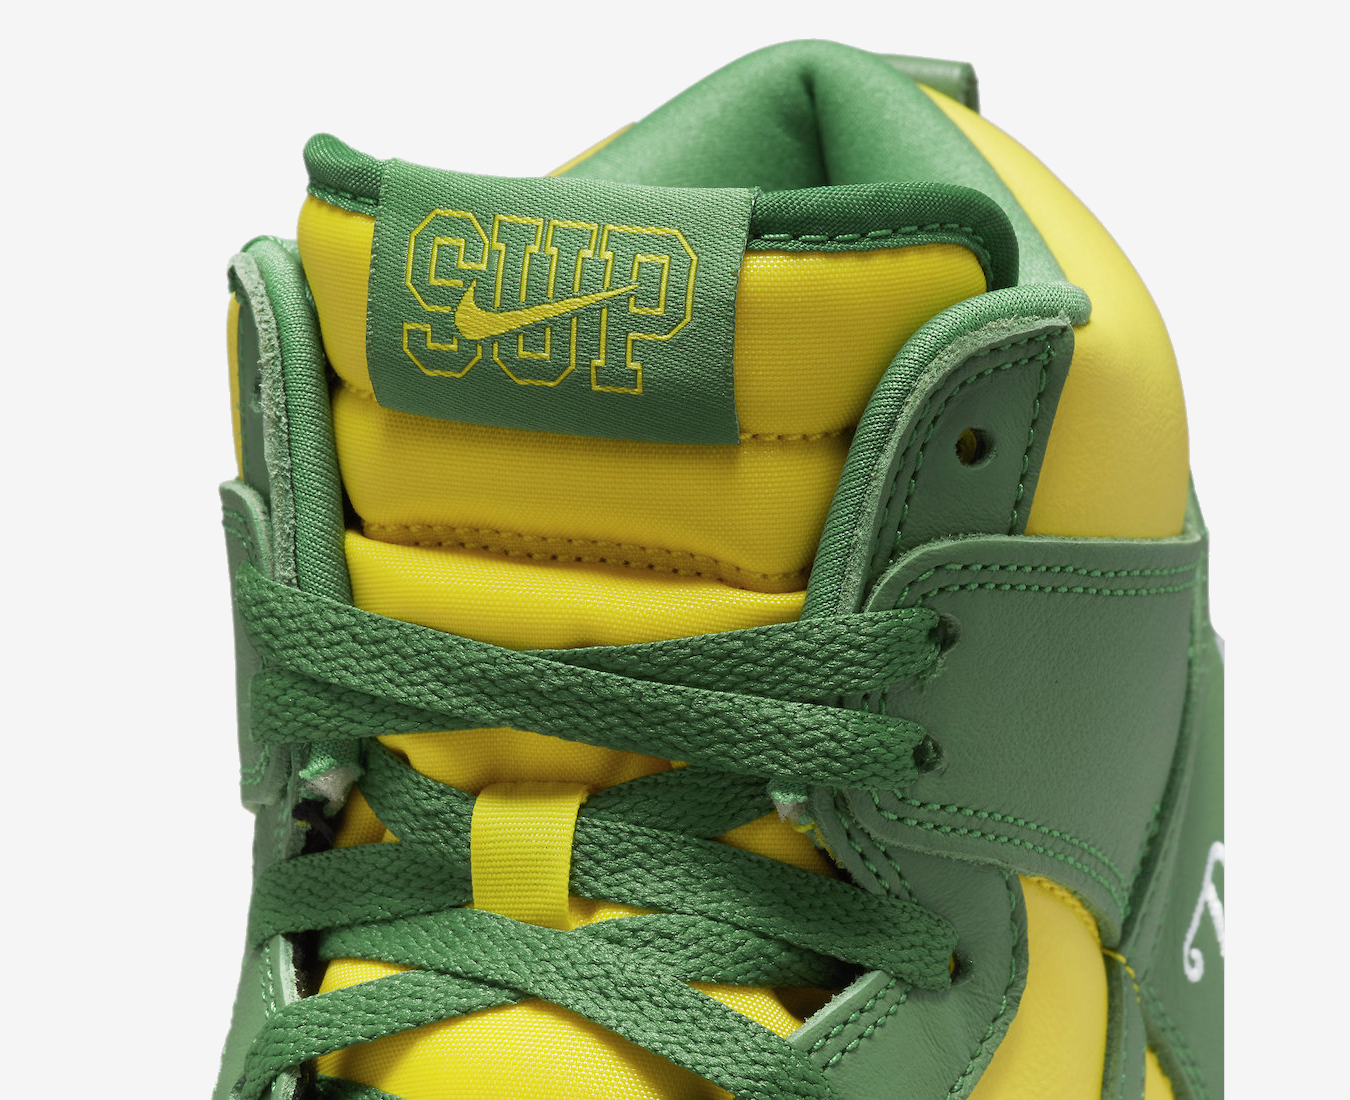 Nike SB Dunk High Supreme 'By Any Means Brazil'